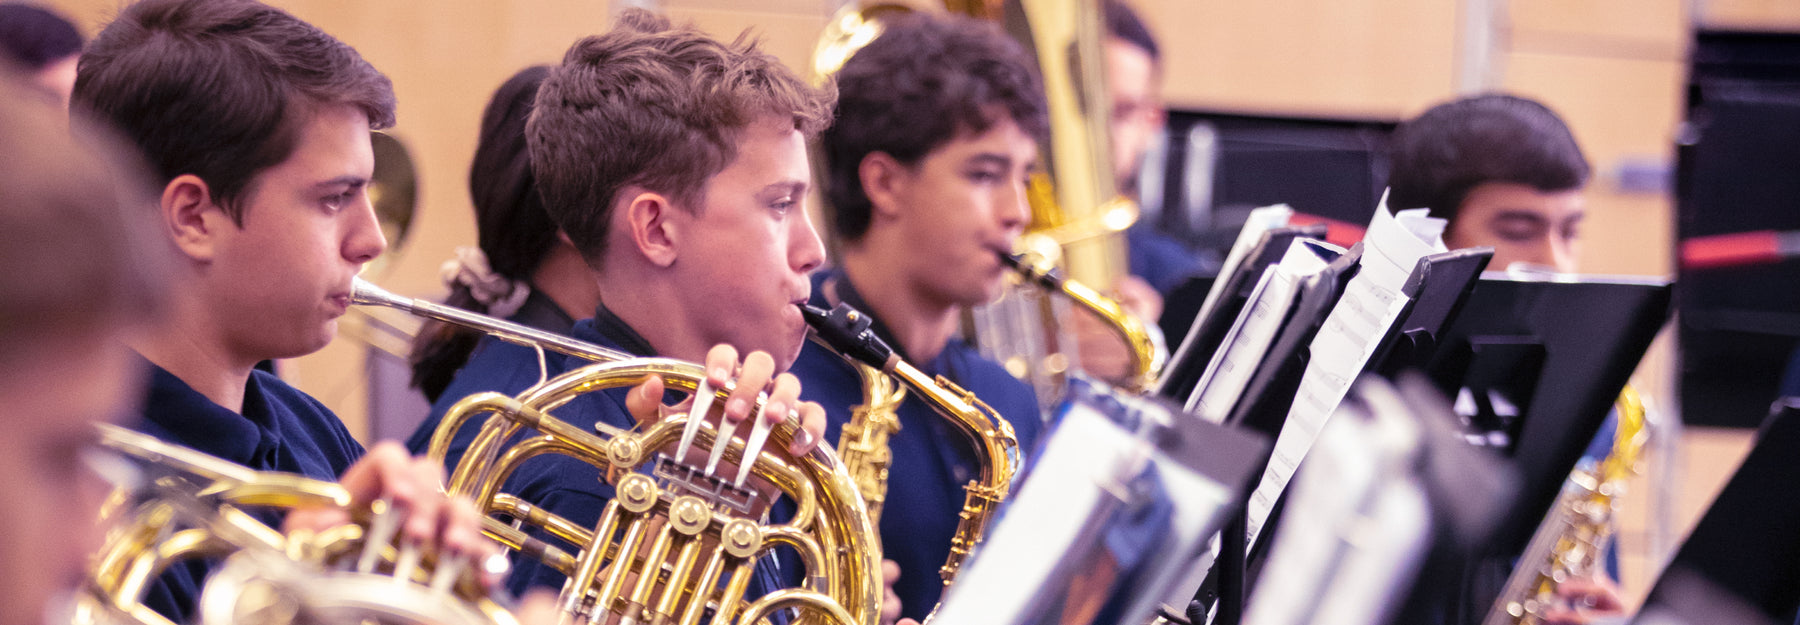 The Harmonious Benefits of Joining School Band